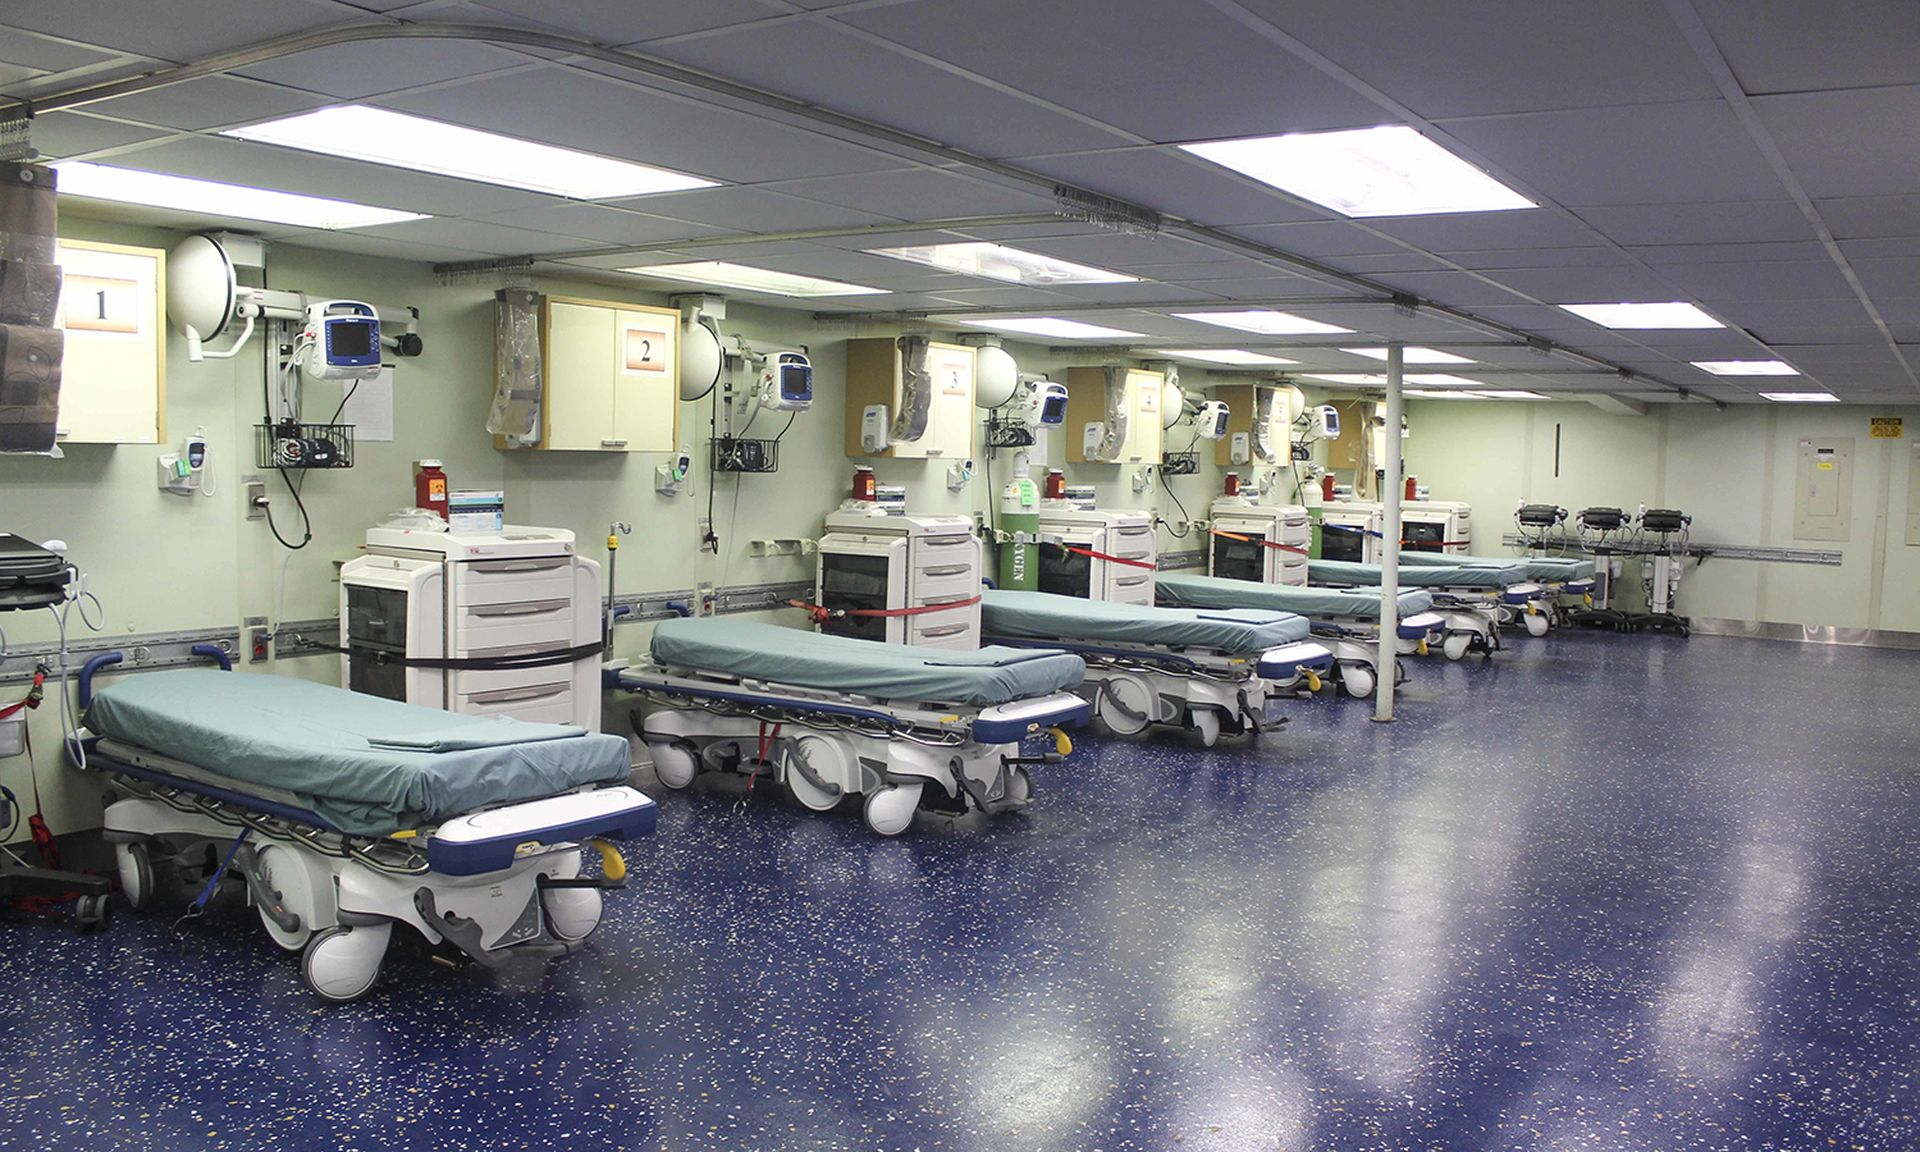 A row of hospital beds and medical equipment are seen in an operating room.